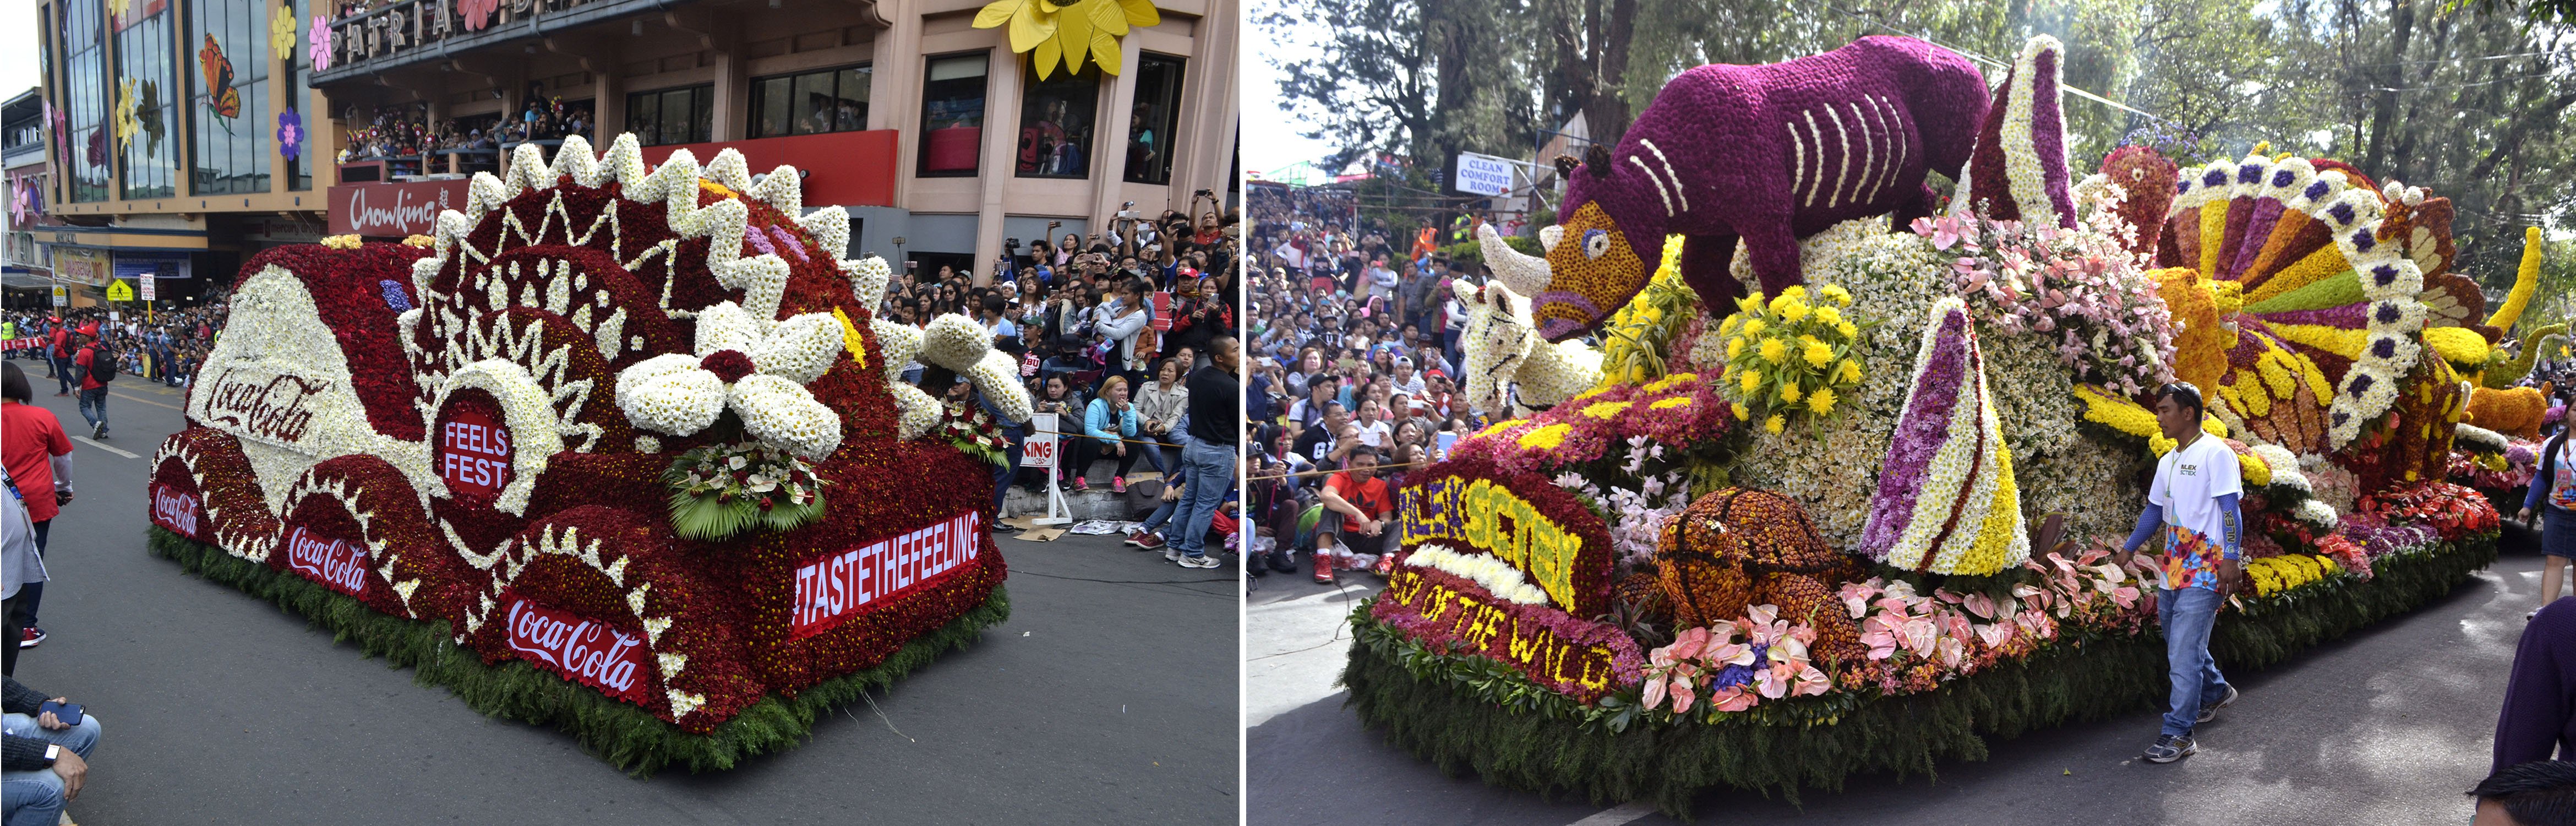 Colorful floats during the 22nd Baguio Flower Festival-Panagbenga 2017